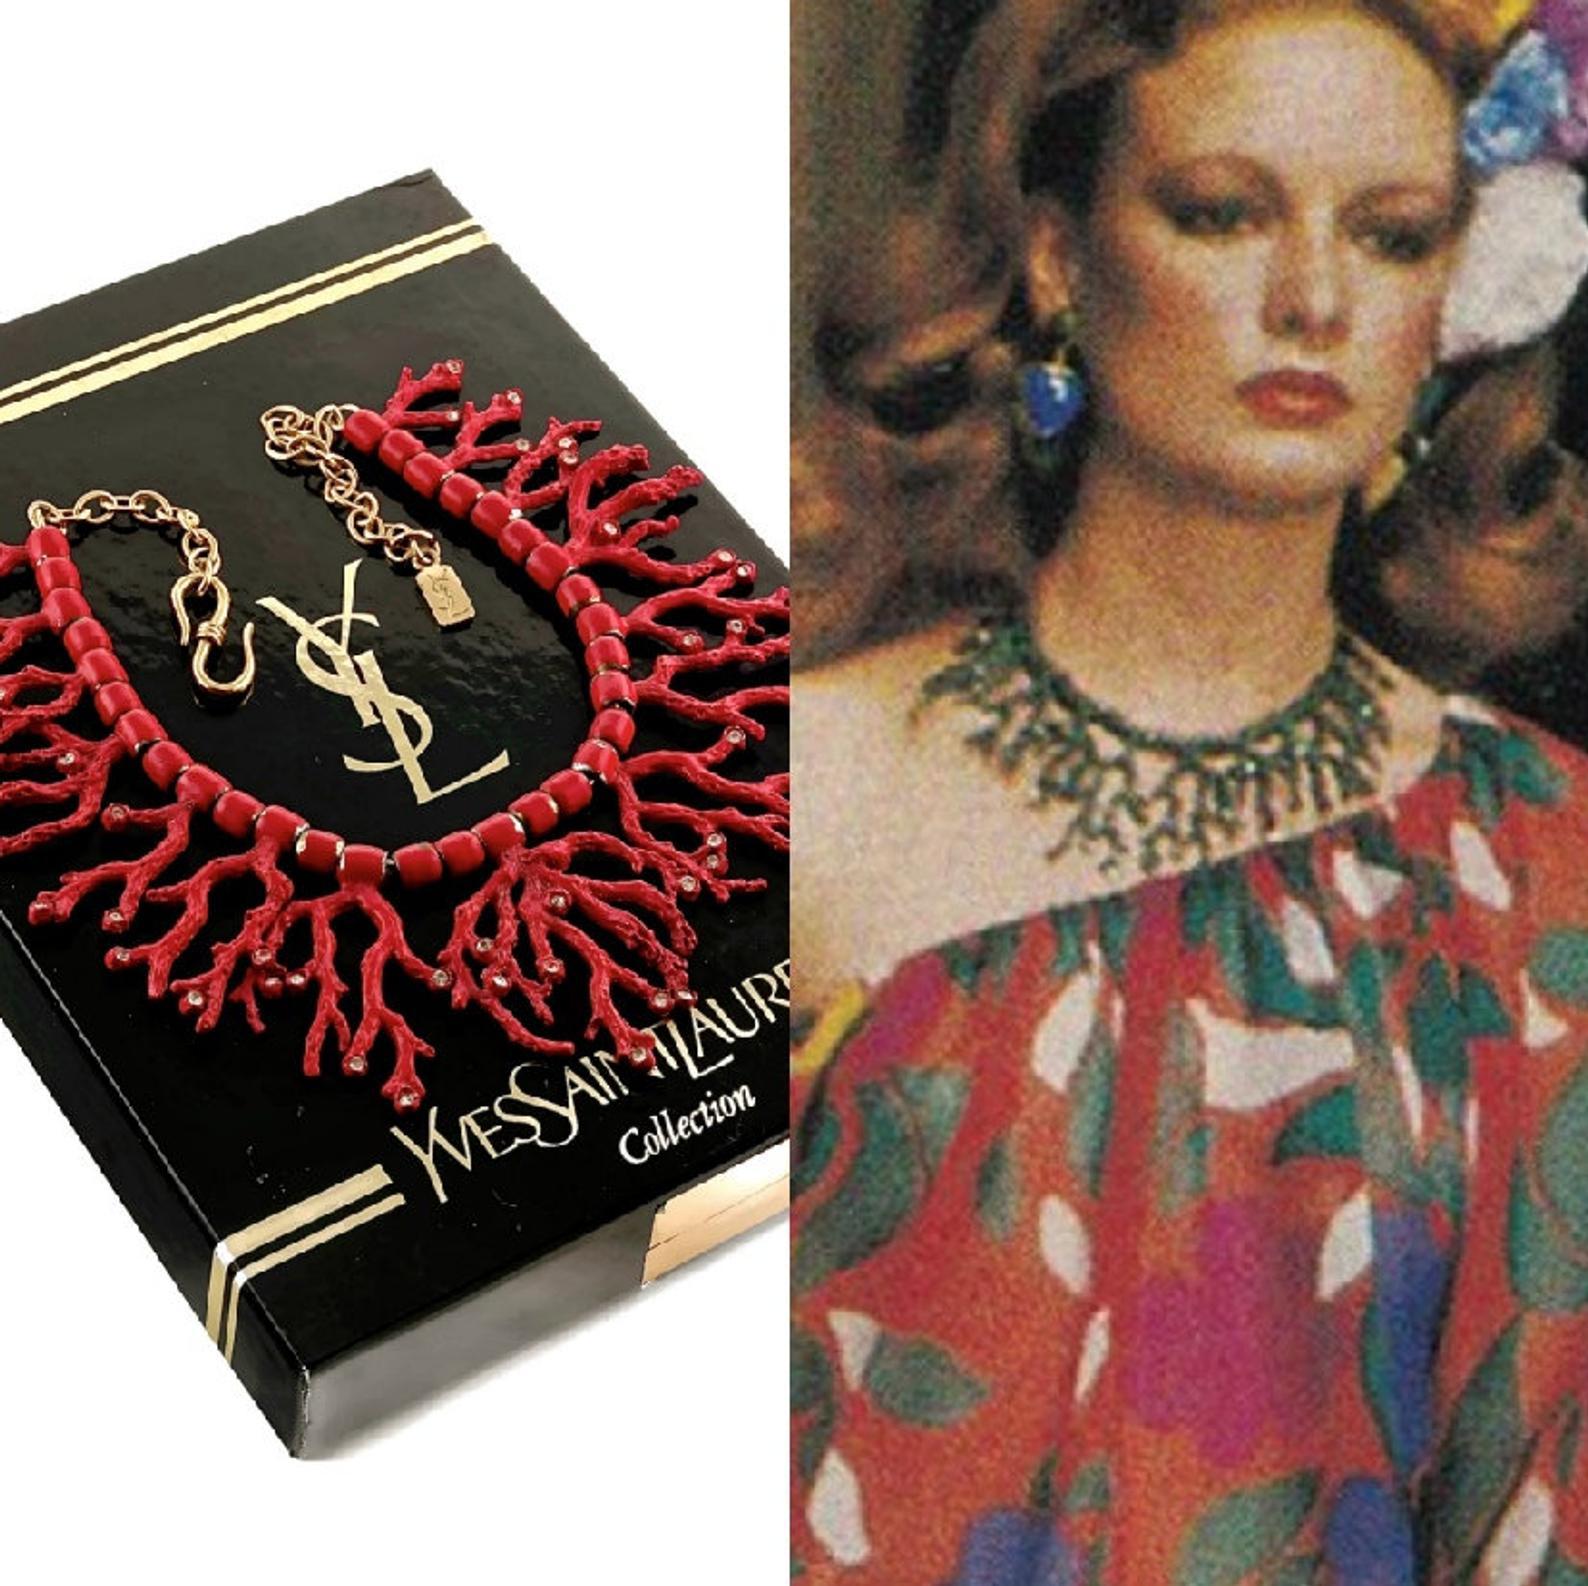 Vintage YSL Yves Saint Laurent by Robert Goossens Coral Rhinestone Necklace

Measurements:
Height: 2 3/8 inches (6.03 cm)
Wearable Length: 14 4/8 inches (36.83 cm) to 18 inches (45.72 cm)

As seen on December 1978 YSL Runway Show. Highly sought